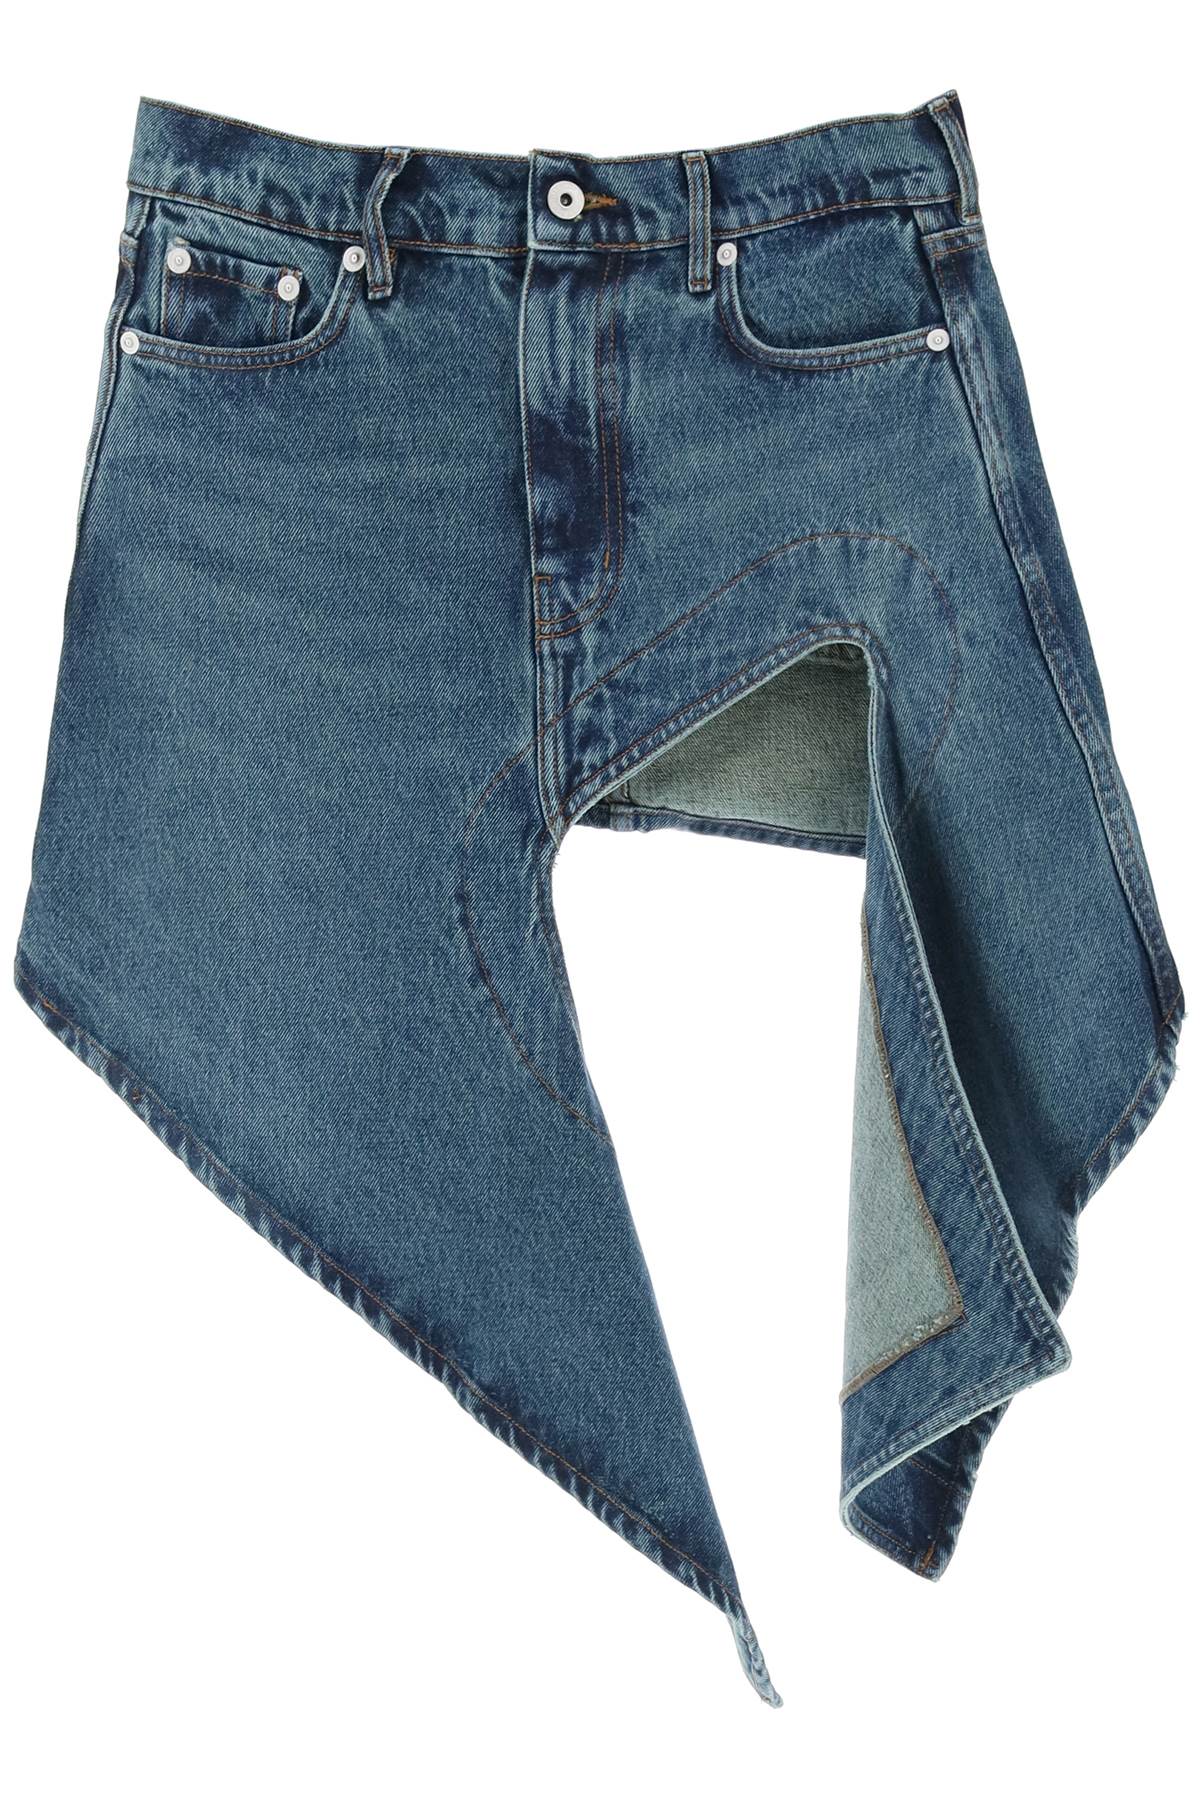 Y Project Y project denim mini skirt with cut out details